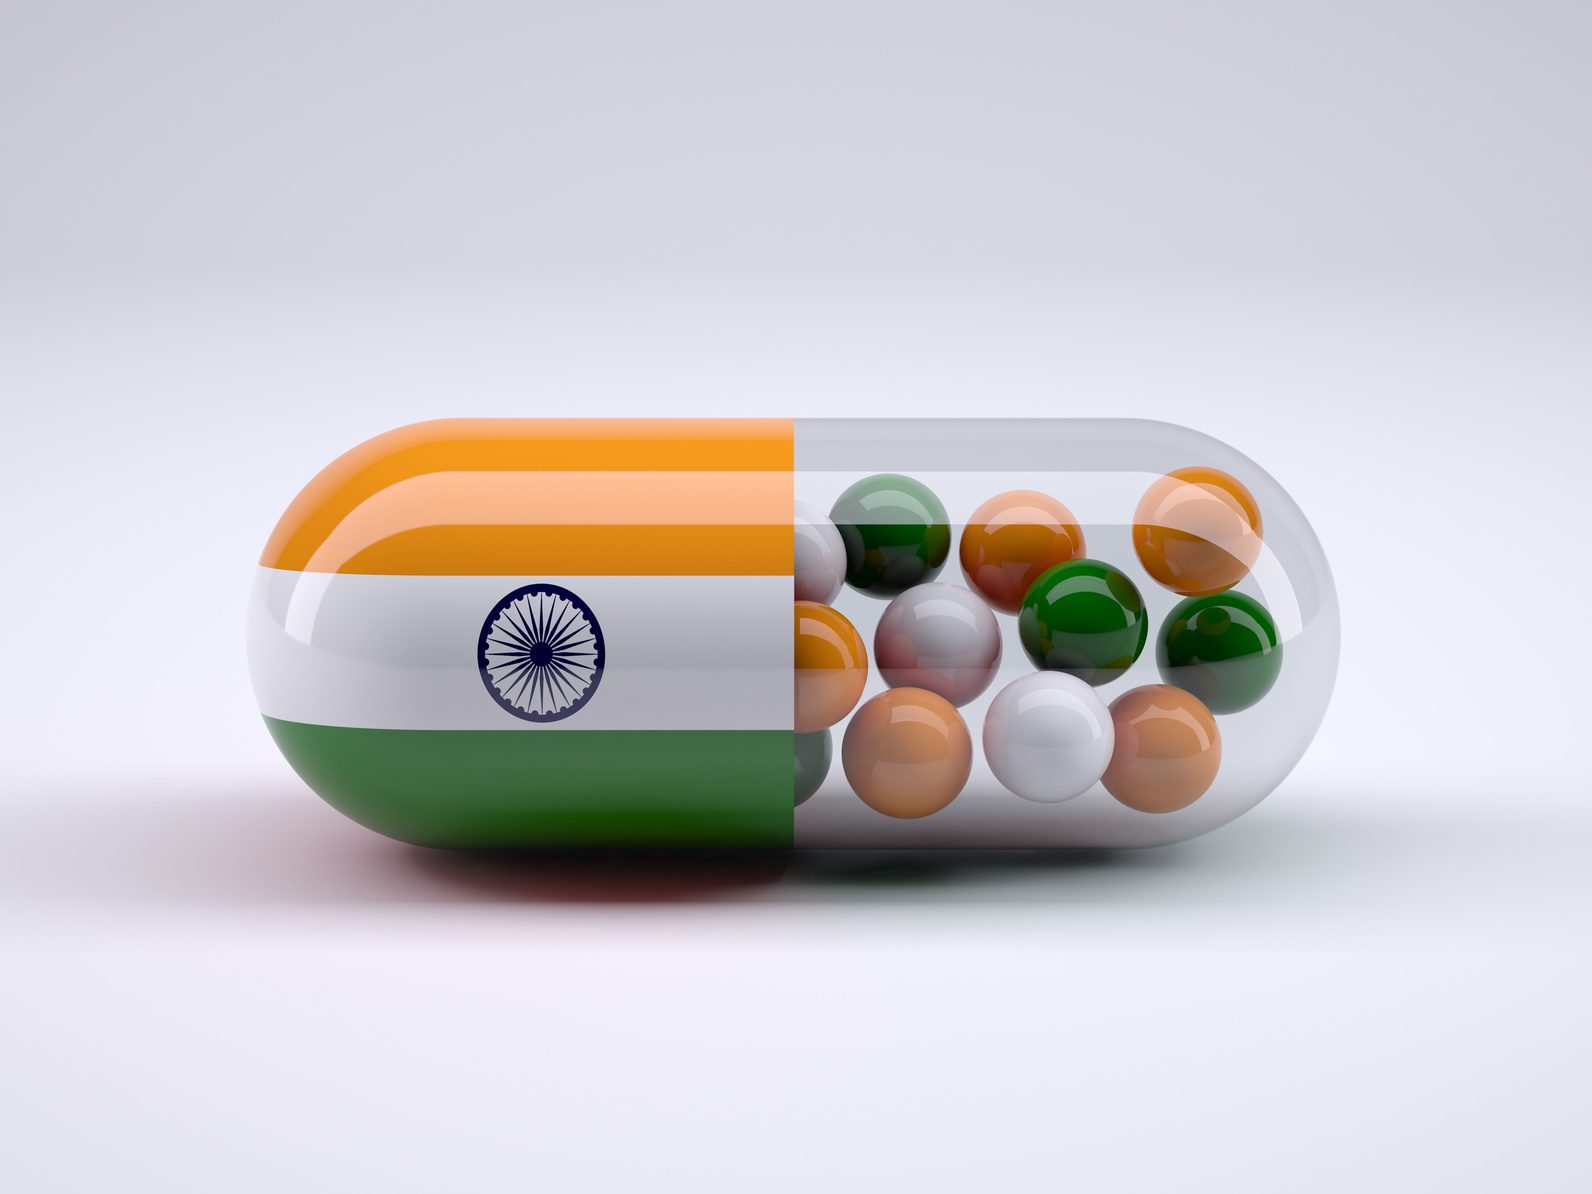 FDI Regulations in Indian Pharmaceutical Sector: A Game-changer?